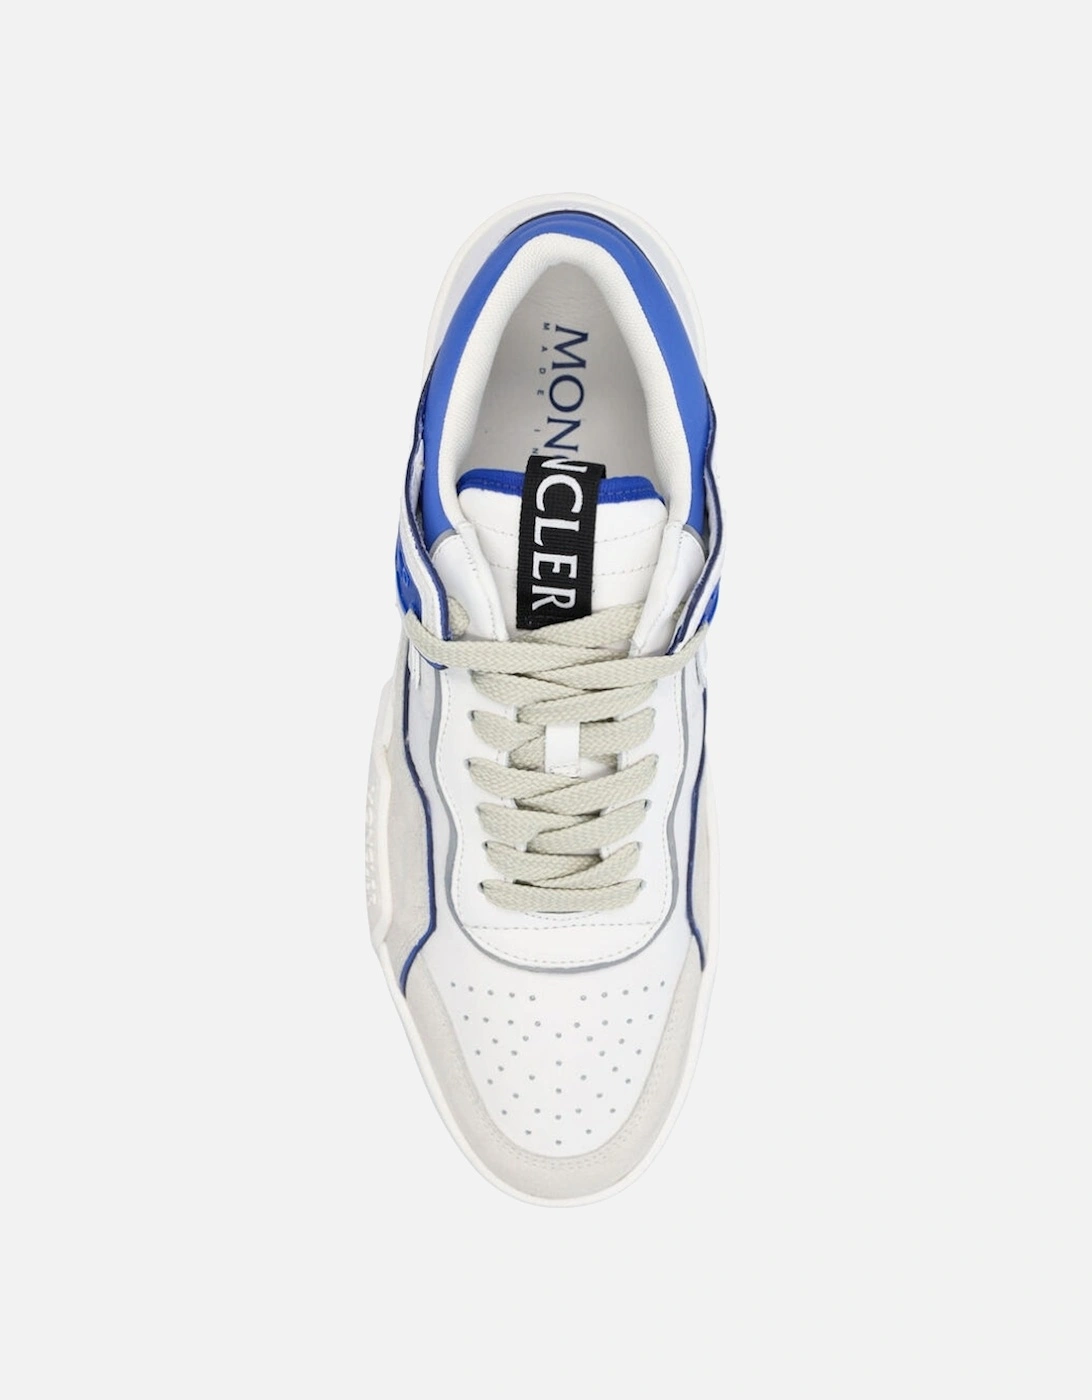 Promyx Space White Sneakers